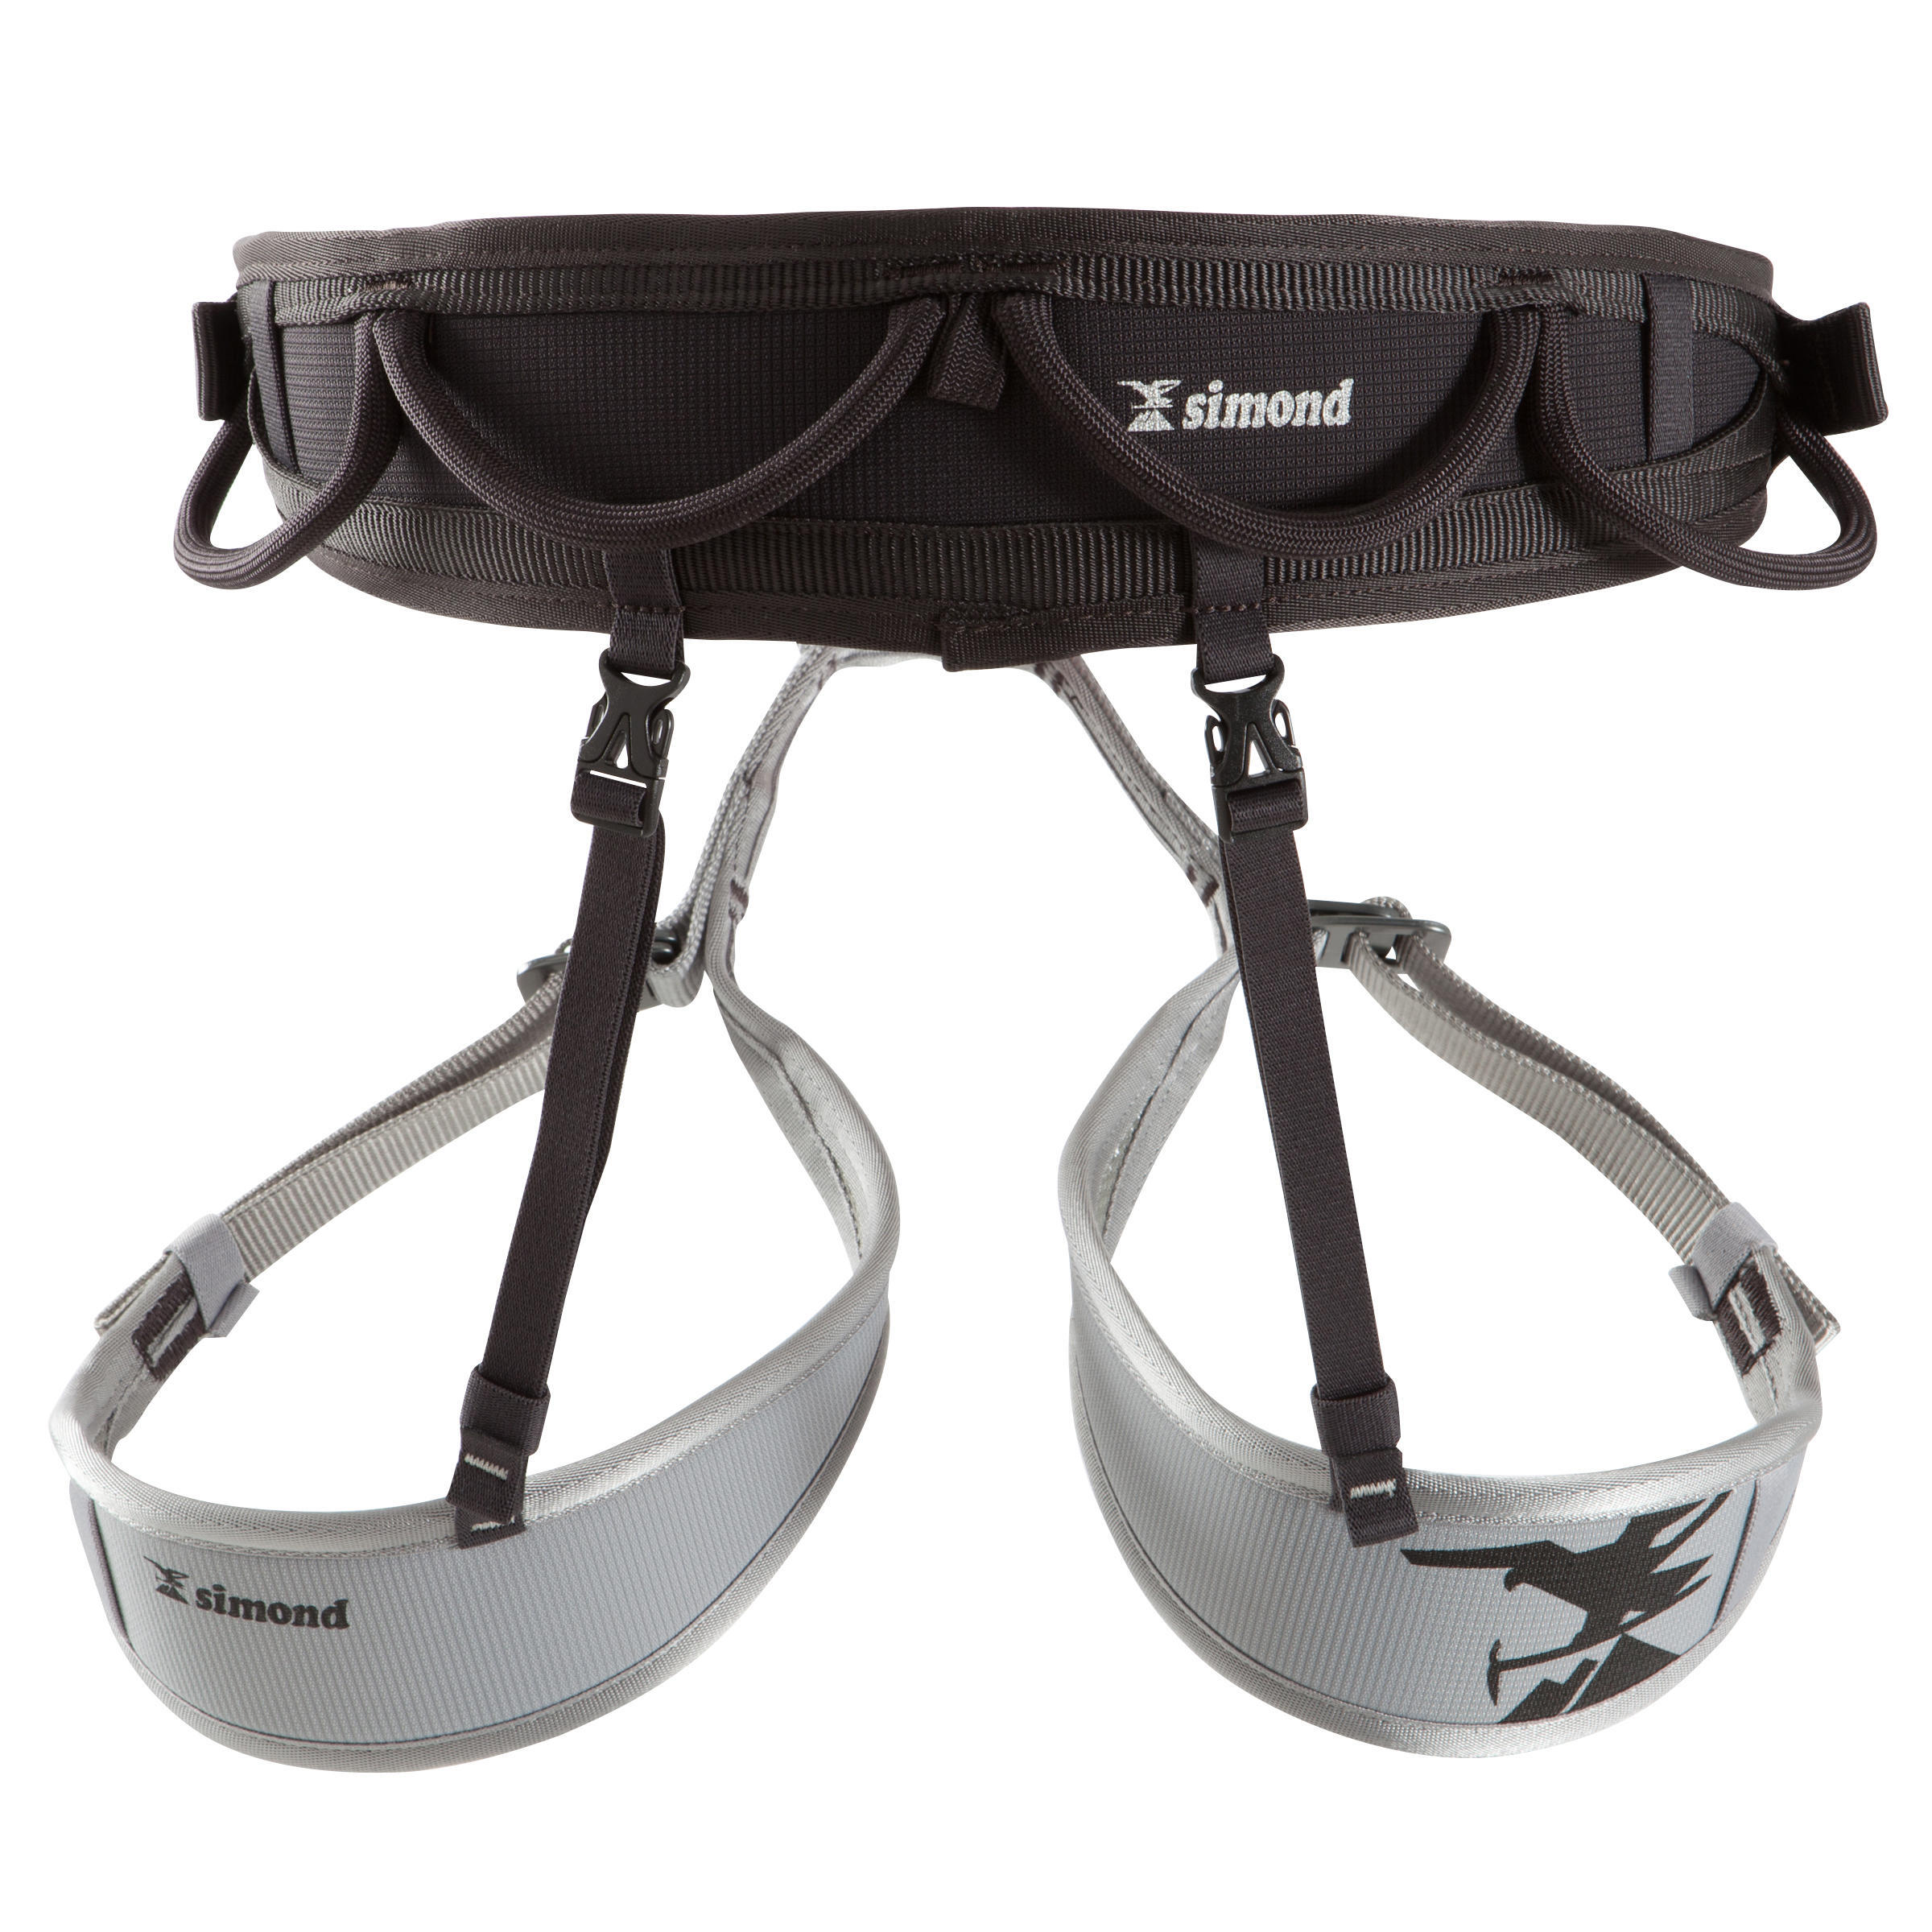 CLIMBING AND MOUNTAINEERING HARNESS - ROCK BLACK GREY 2/7